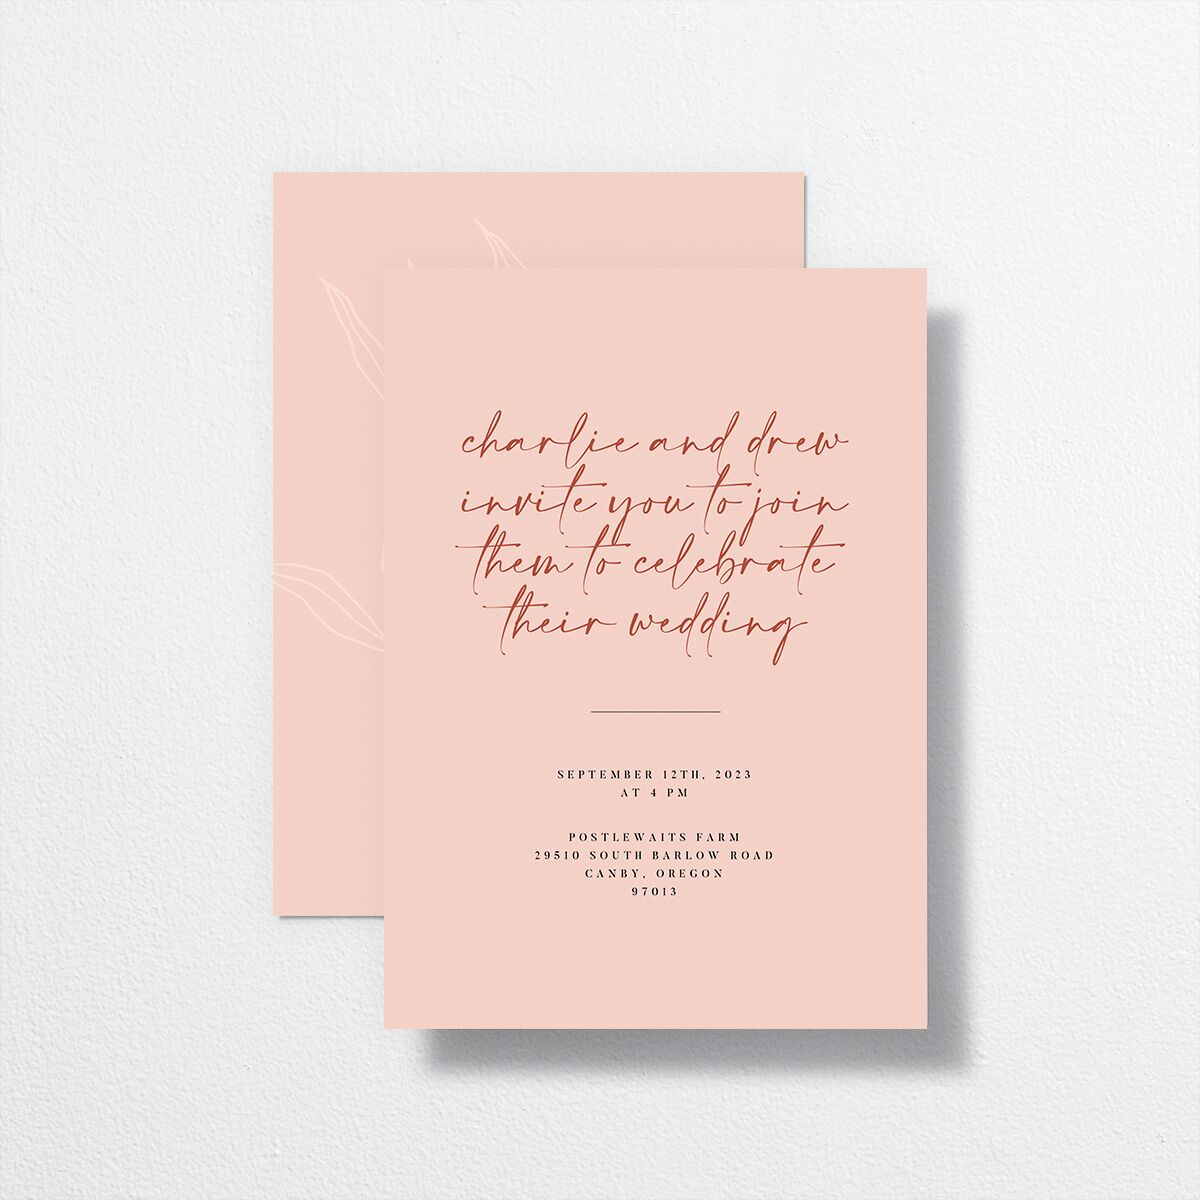 Romantic Bohemian Wedding Invitations front-and-back in pink